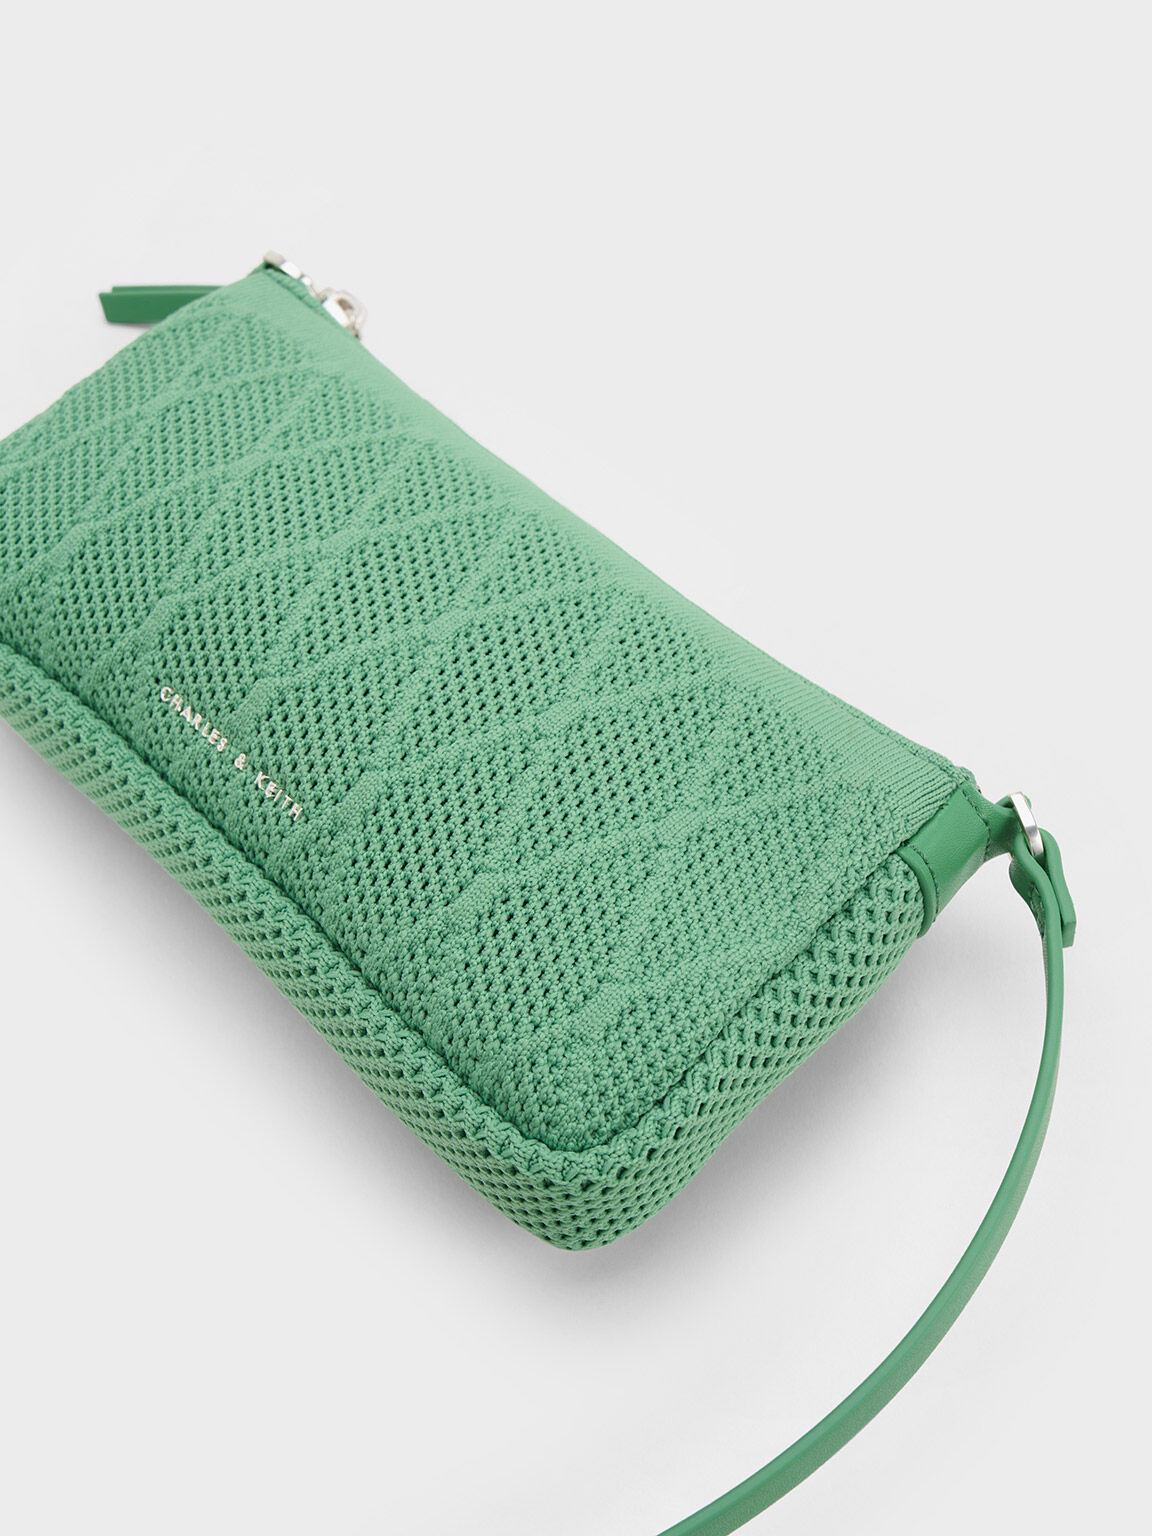 Geona Knitted Phone Pouch - Green